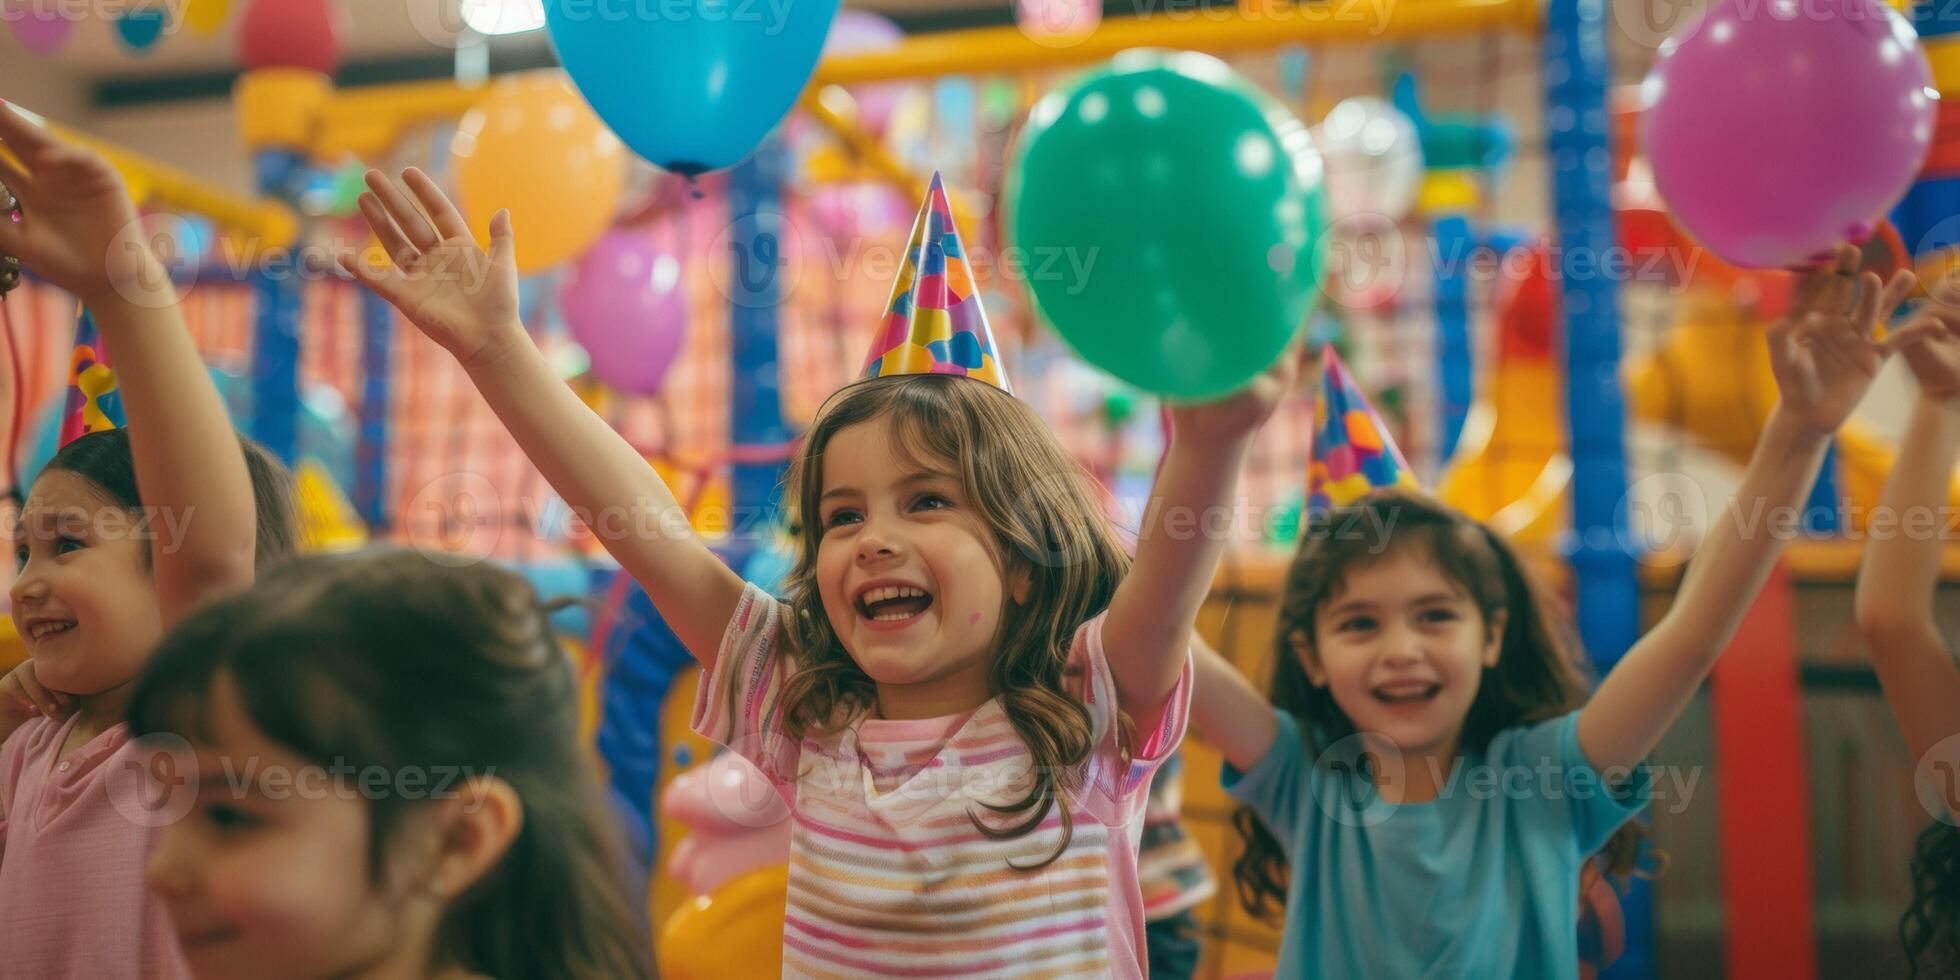 AI generated a group of young girls are holding balloons in their hands at a birthday party photo